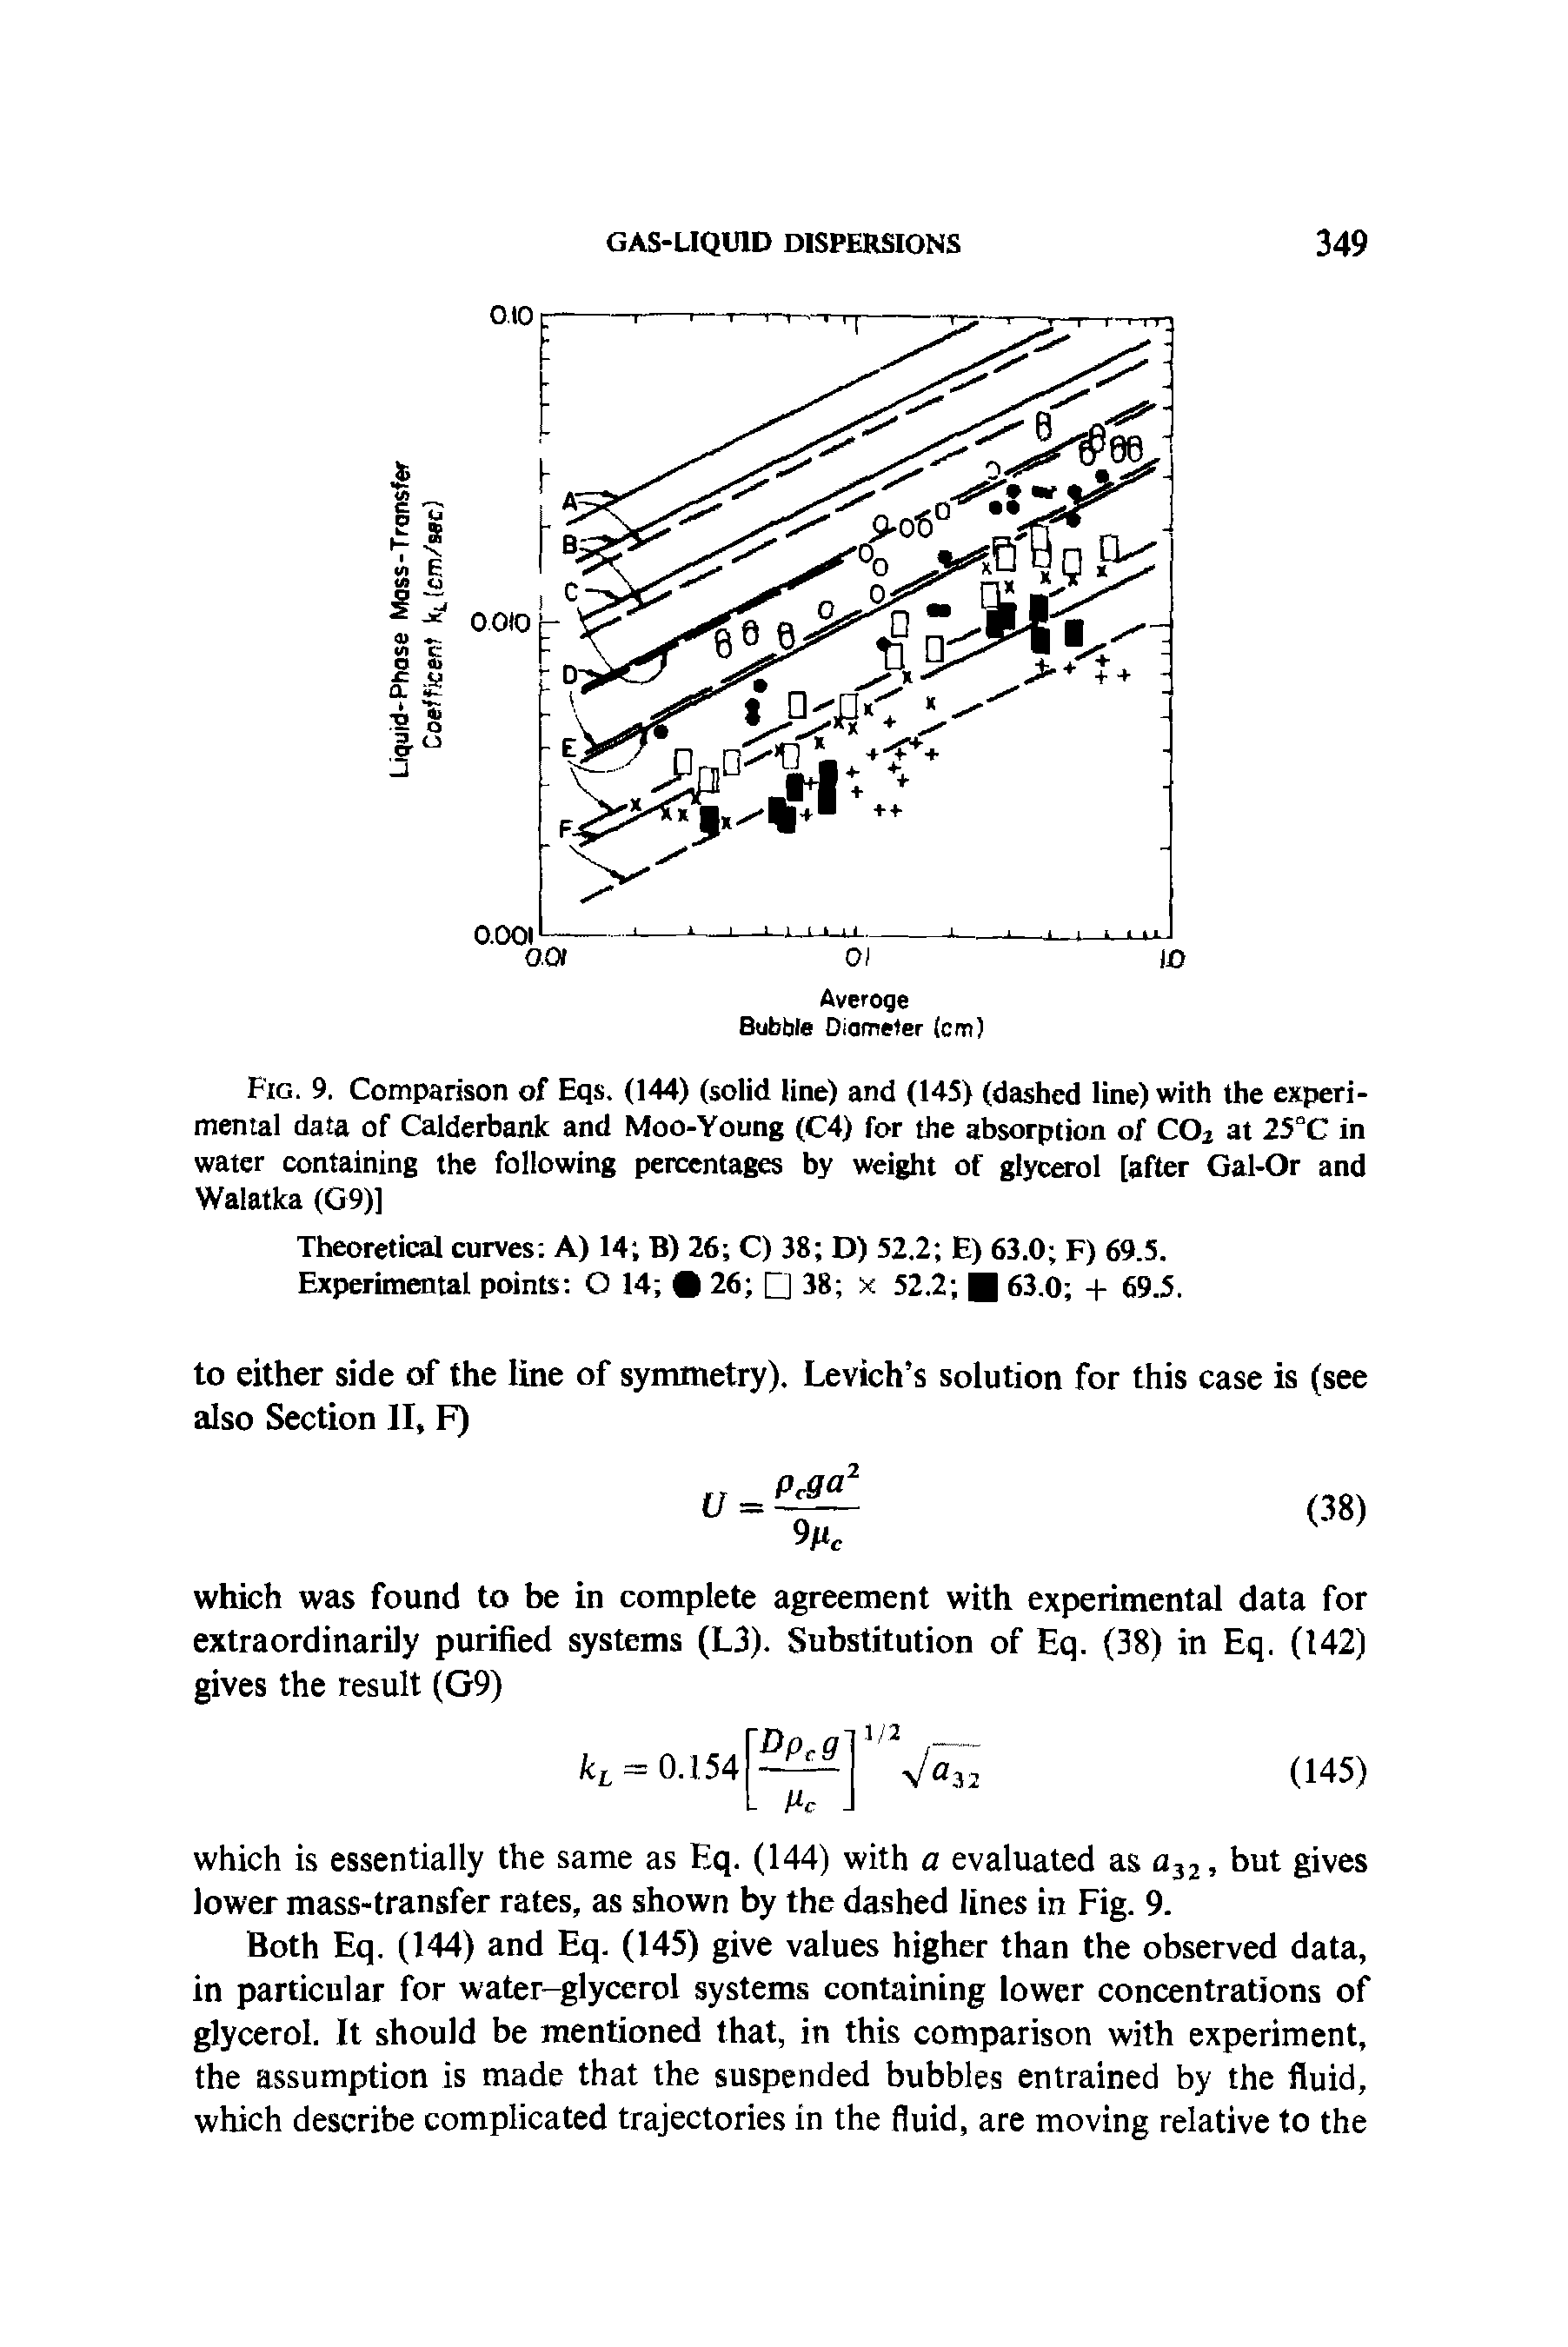 Fig. 9. Comparison of Eqs. (144) (solid line) and (145) (dashed line) with the experimental data of Calderbank and Moo-Young (C4) for the absorption of C02 at 25°C in water containing the following percentages by weight of glycerol [after Gal-Or and Walatka (G9)]...